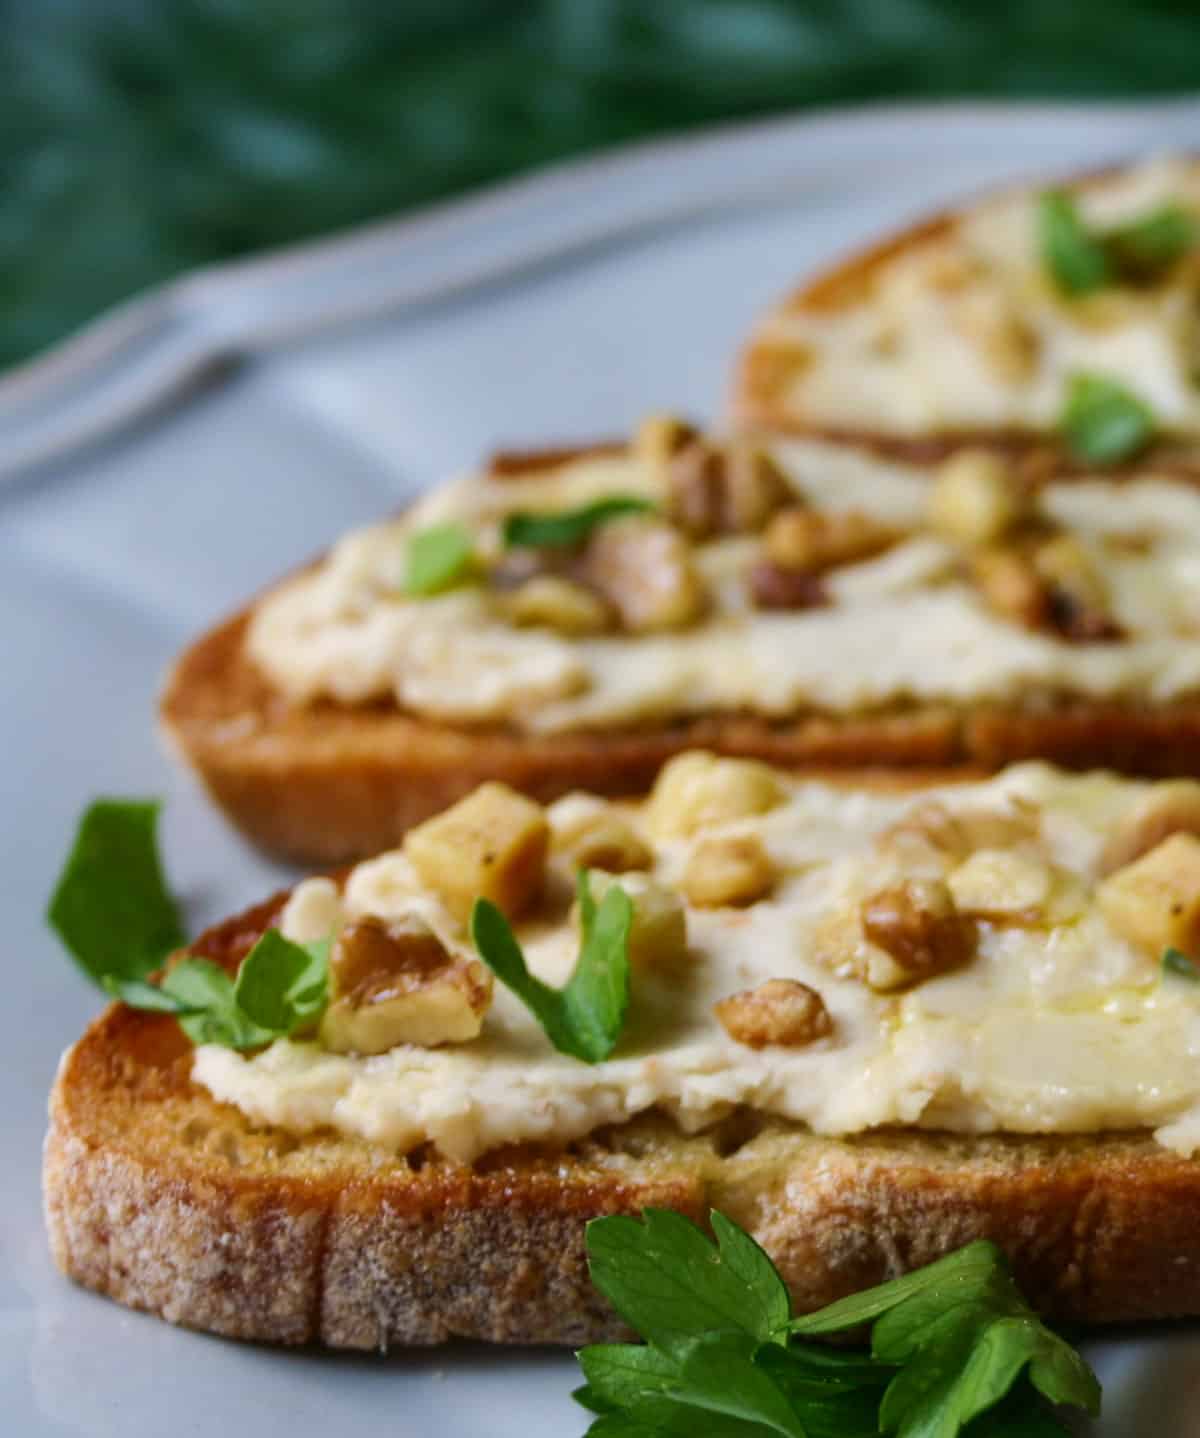 portions of 3 bruschetta topped with cannellini bean puree and walnuts, on a blue plate